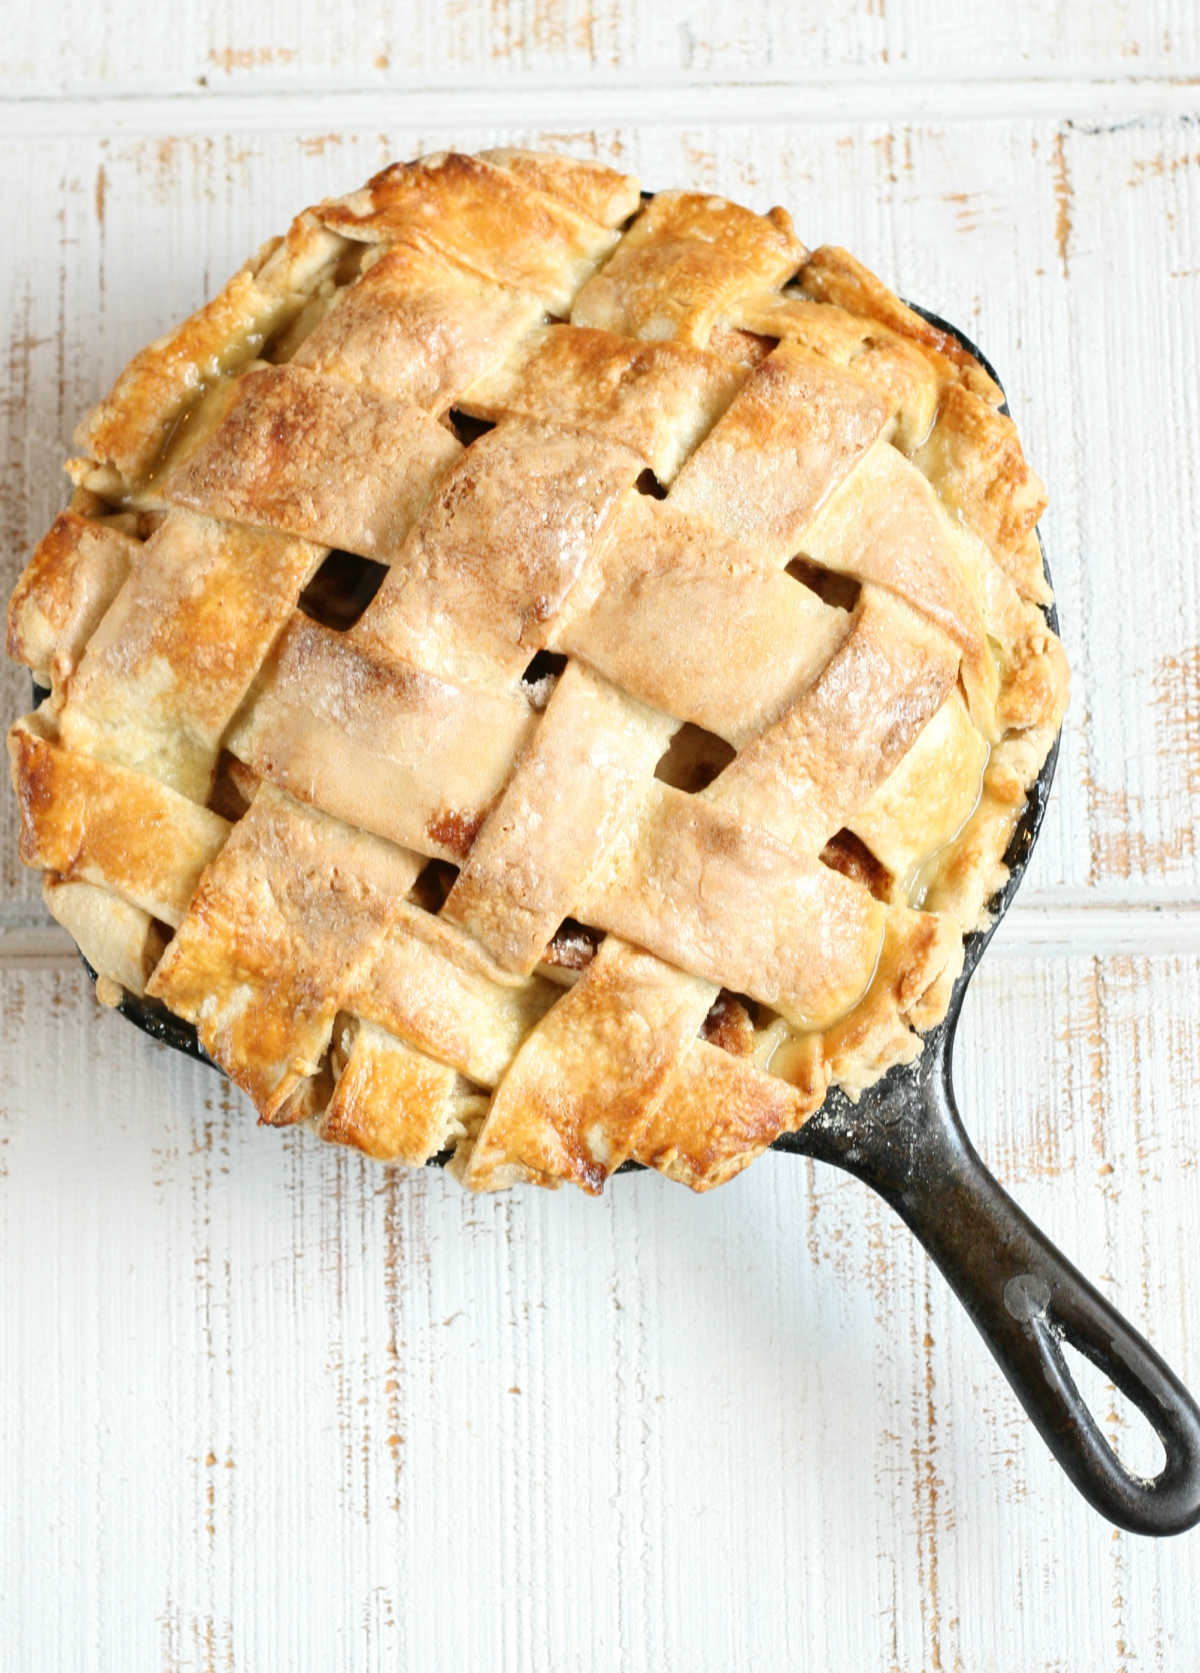 Apple Pie with lattice crust in a small cast iron skillet on white reclaimed wood.